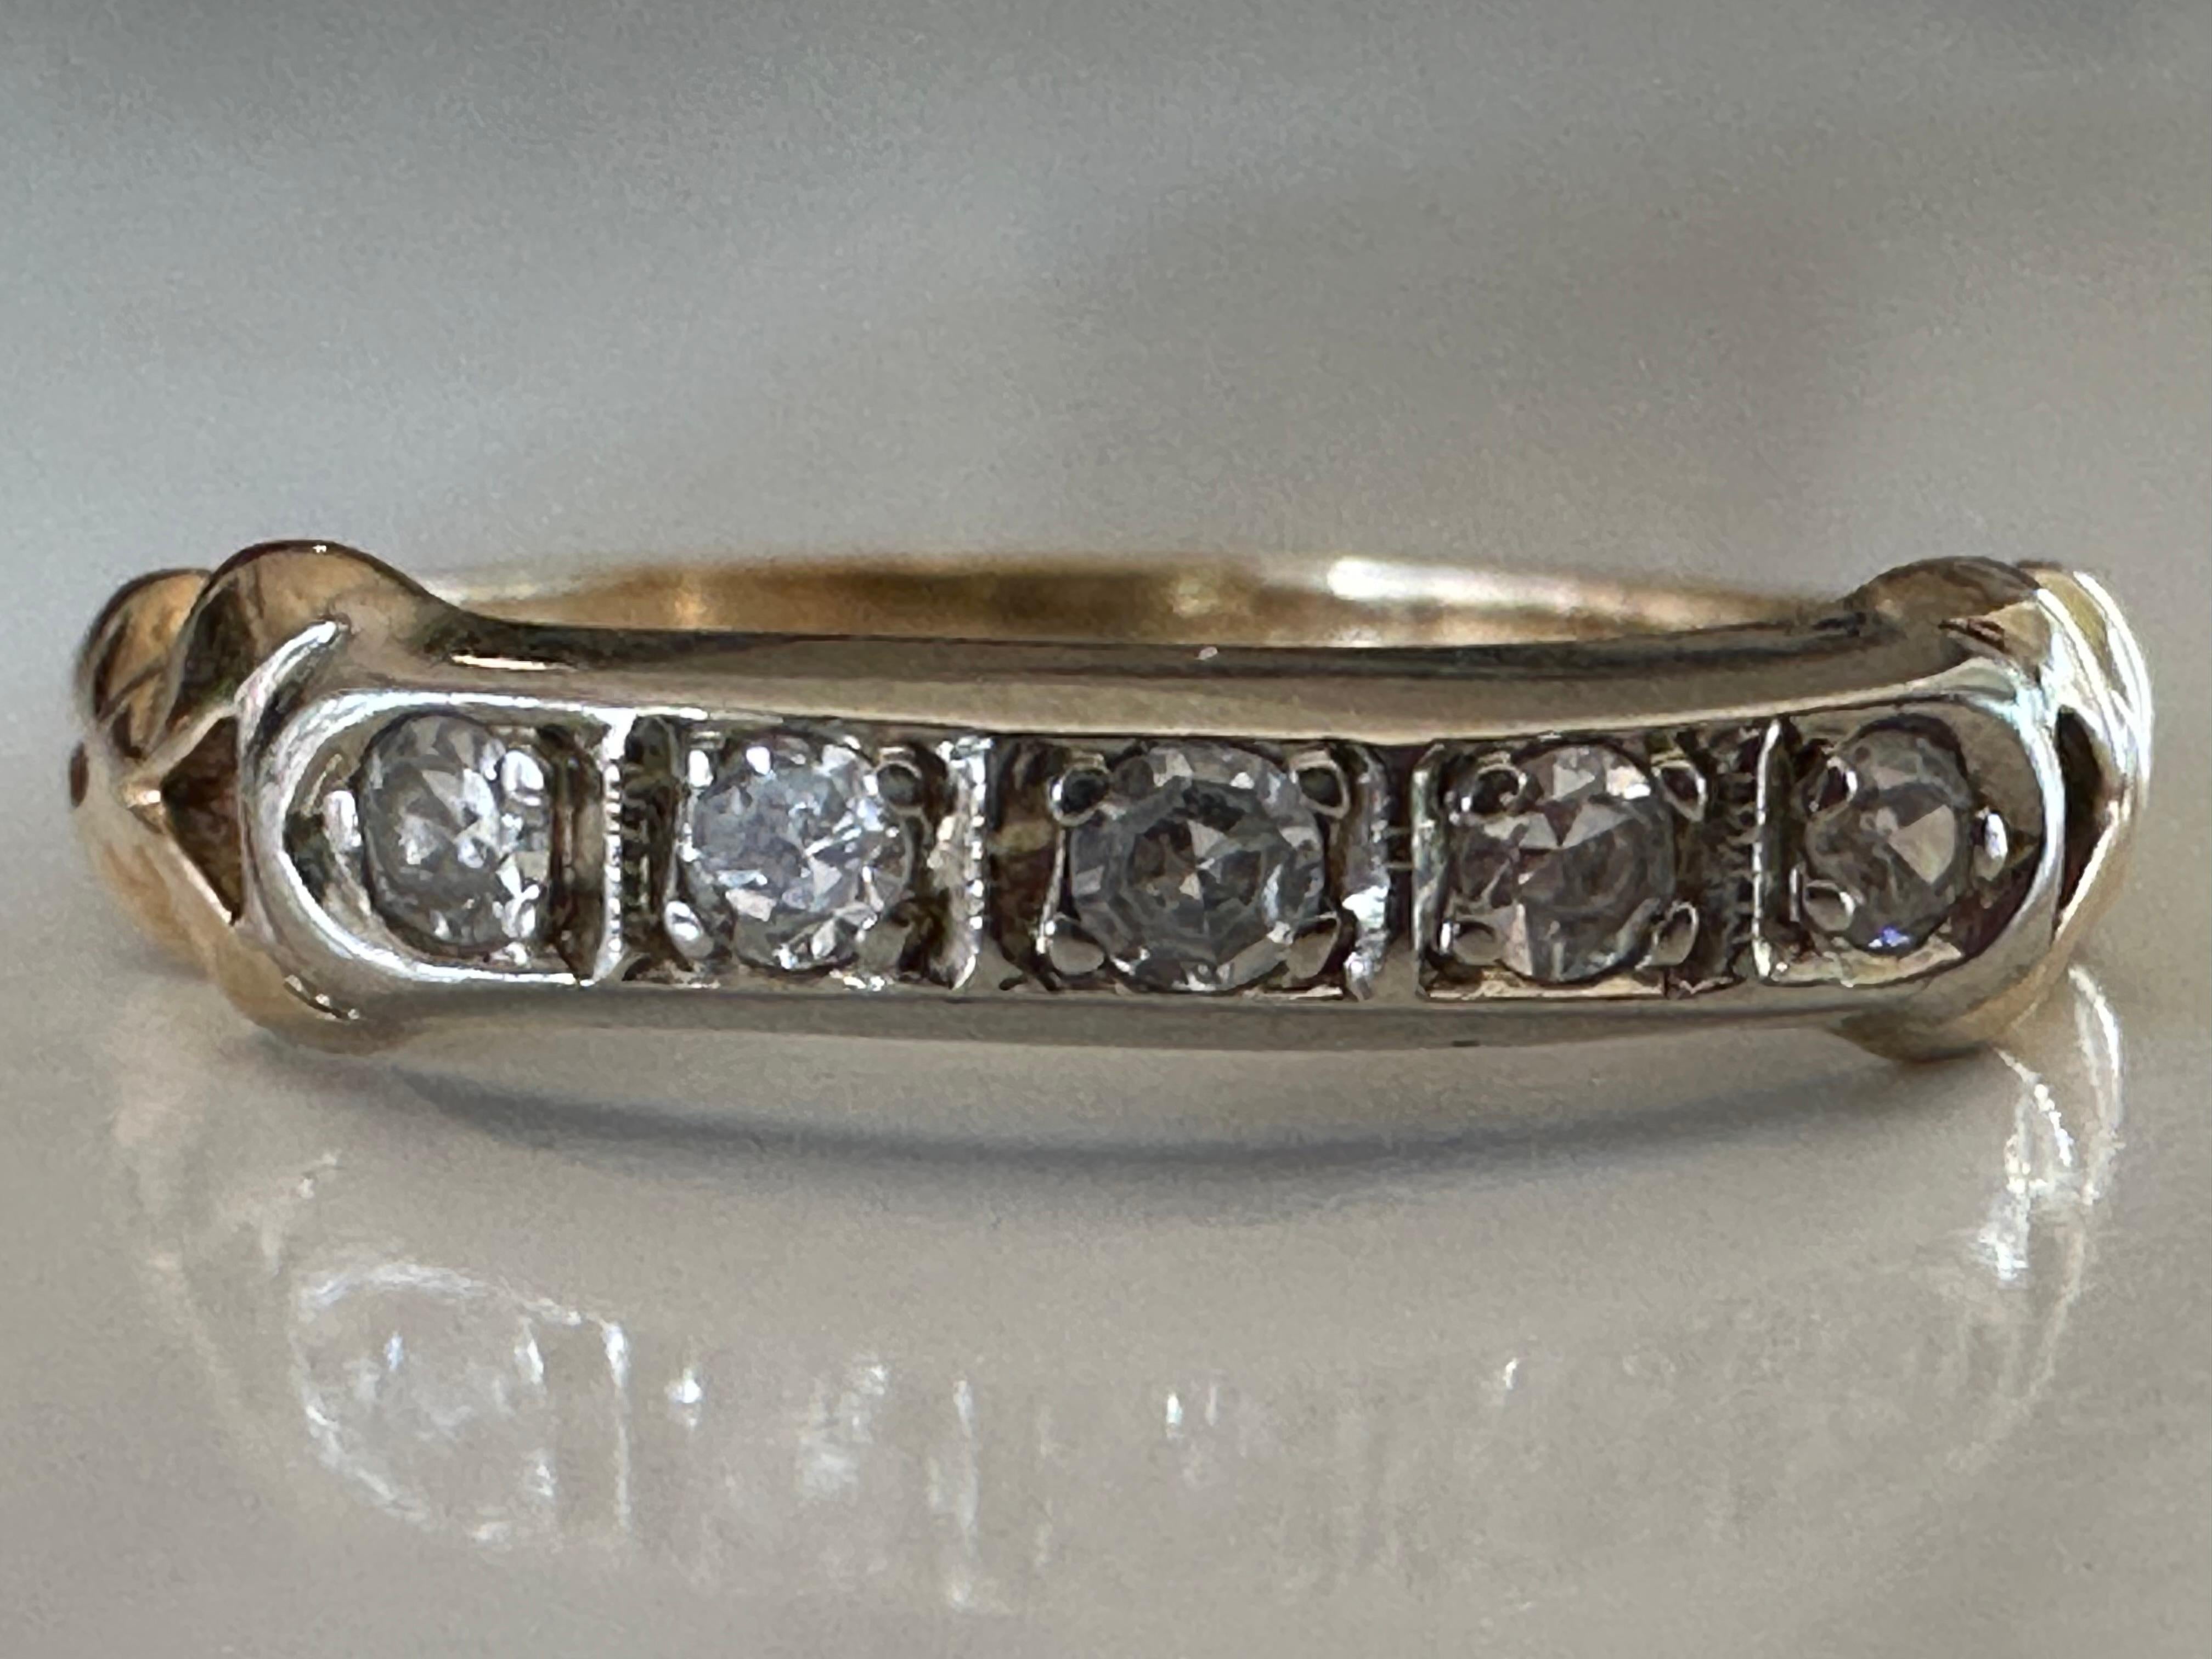 Five single-cut diamonds, together weighing approximately 0.05 carats, F color, SI clarity, sparkle shoulder-to-shoulder in this classic and lovely band ring, hand fabricated in two-tone 14K gold. 


